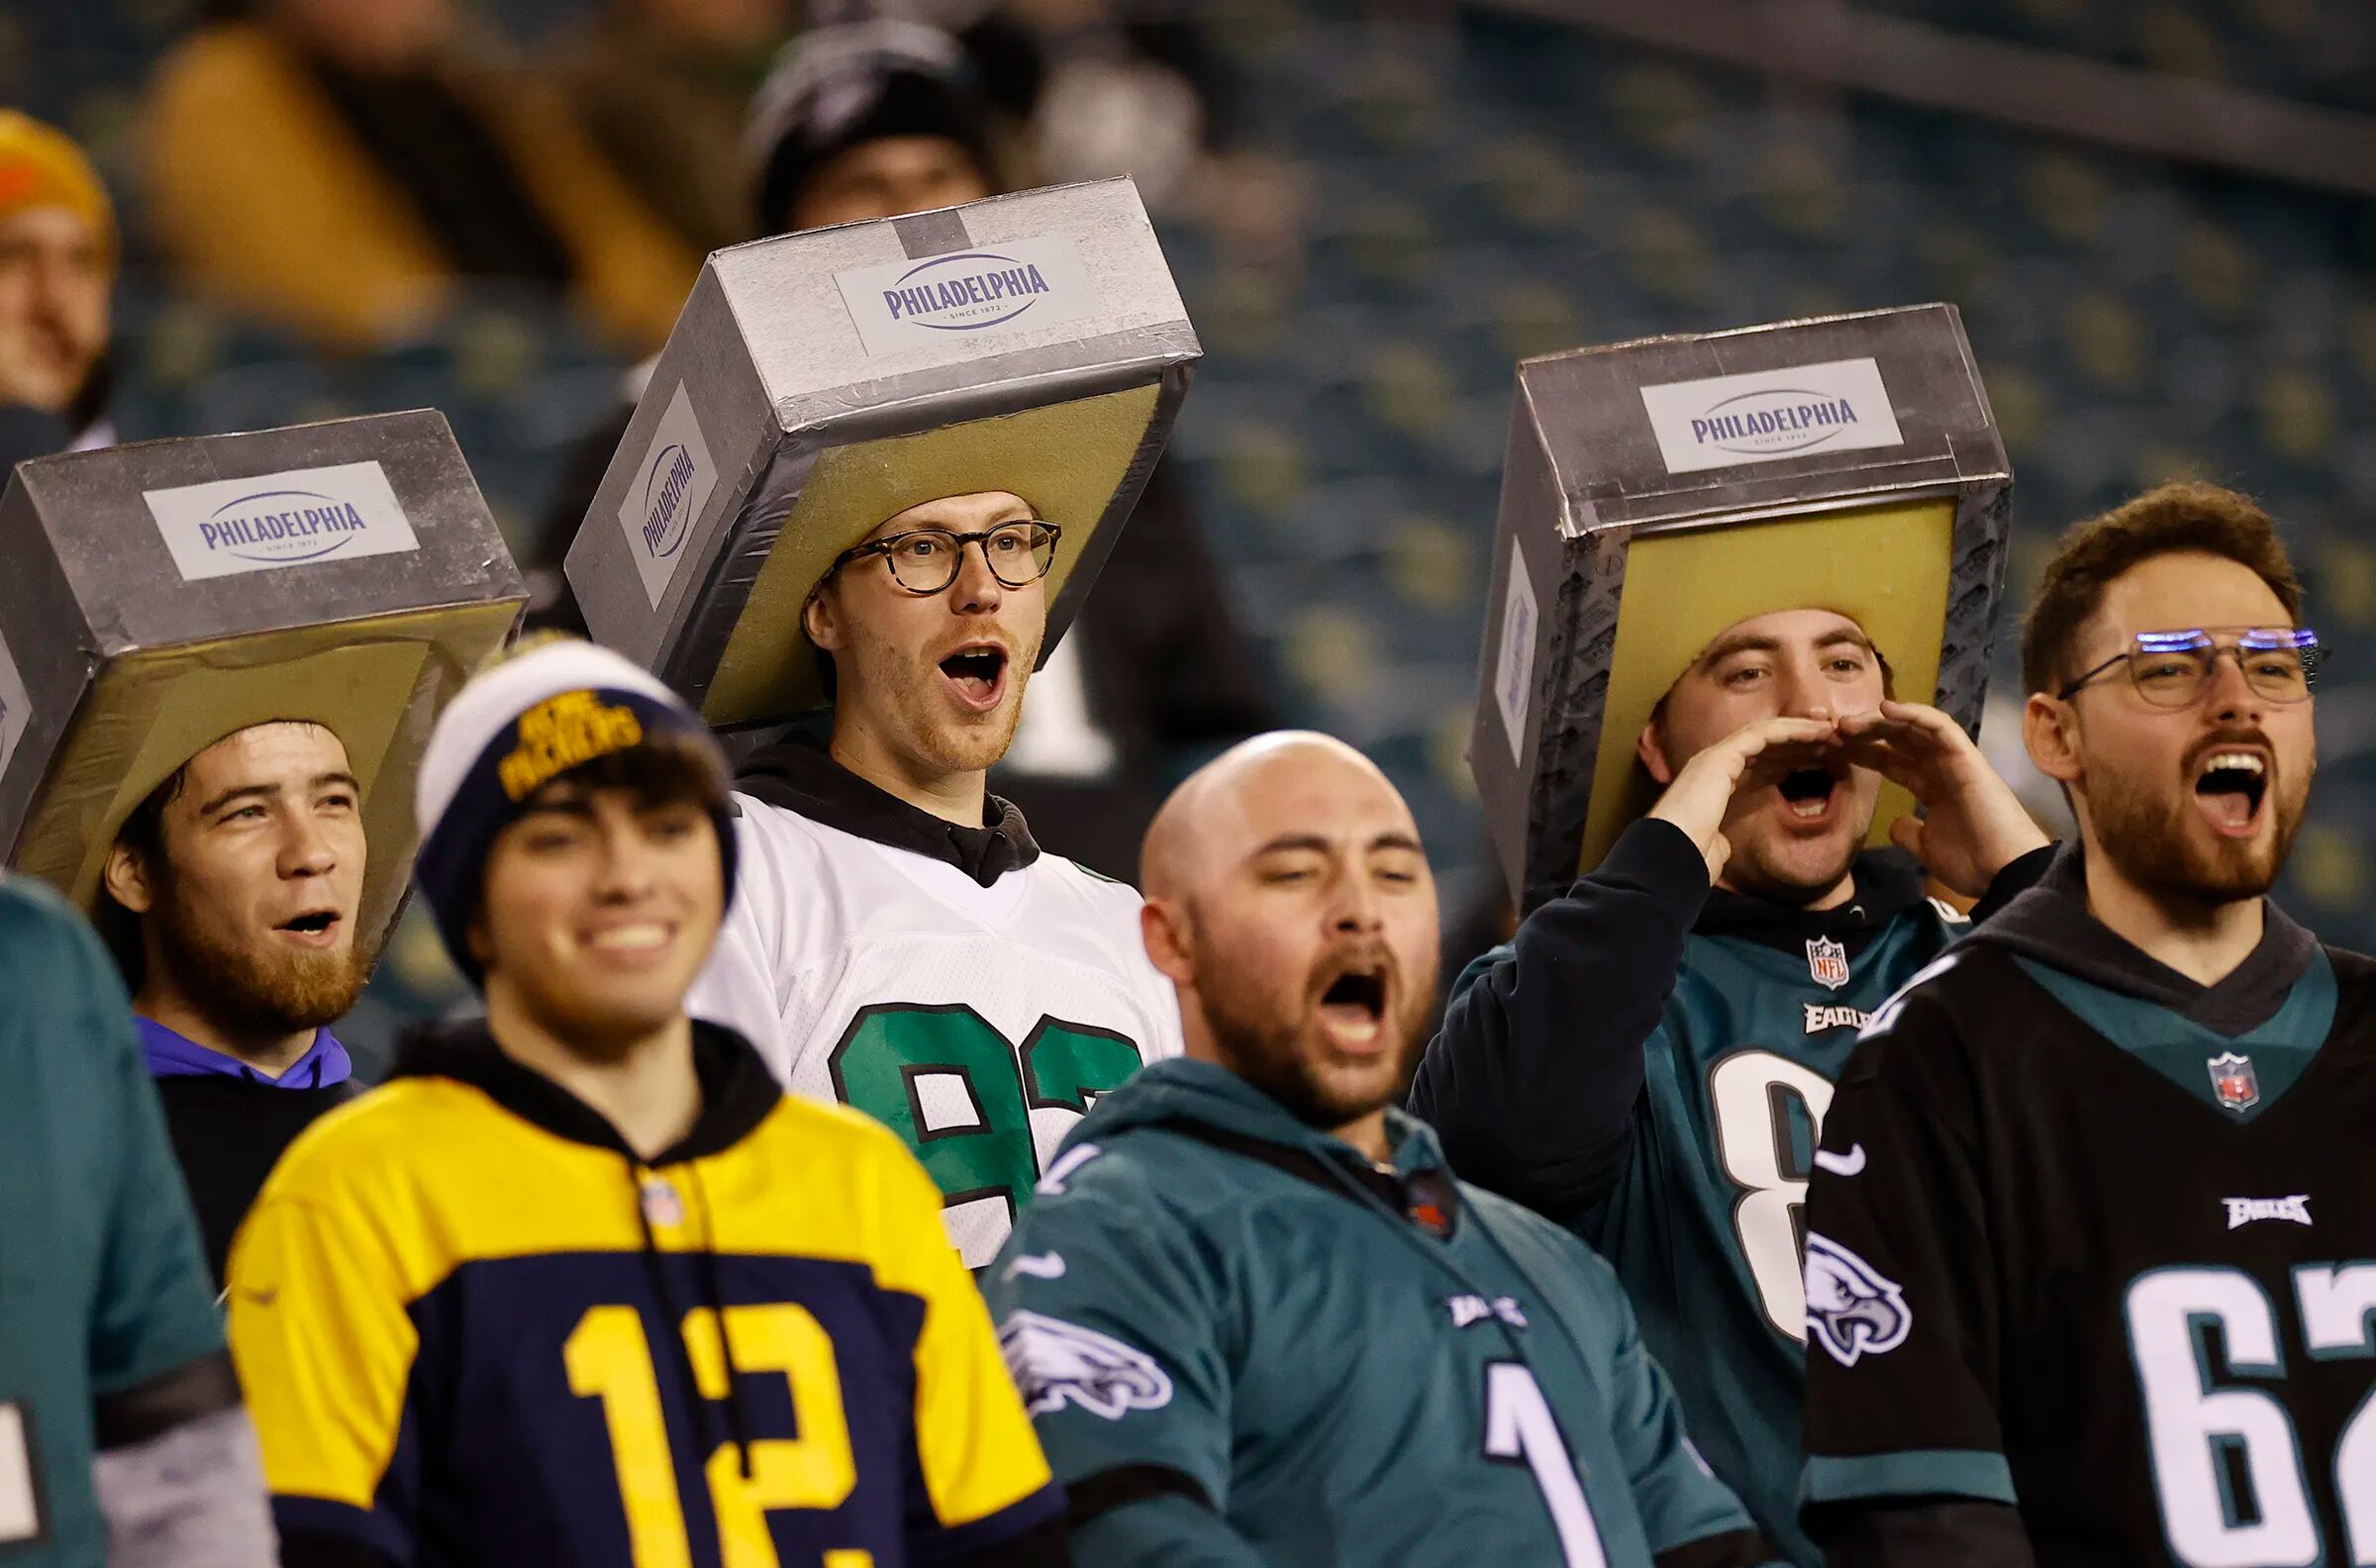 Photos from the Eagles' Sunday night victory over the Packers